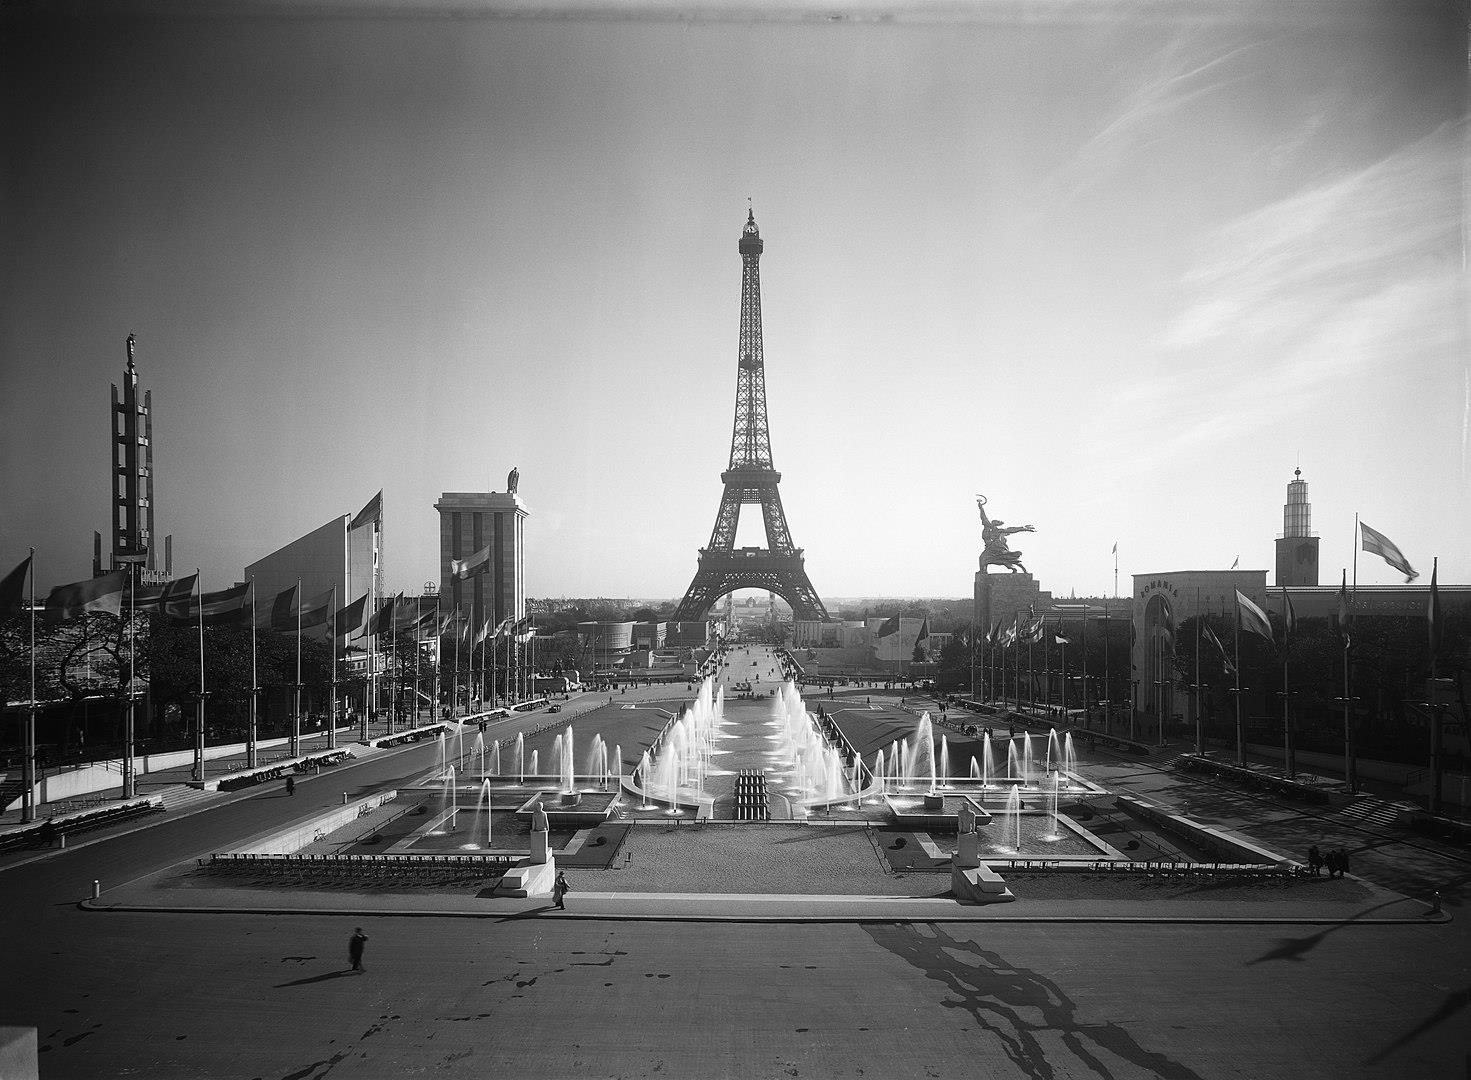 <p>In 1931, husband-and-wife filmmakers Stefan and Franciszka Themerson shot the surrealist short film <em>Europa. </em>The movie featured strong anti-fascist themes, as Europe teetered on the brink of WWII. </p>  <p>When the Themersons moved to Paris in 1938, they left <em>Europa </em>and four other films behind in a Warsaw film laboratory, which was later seized by the Nazis.</p>